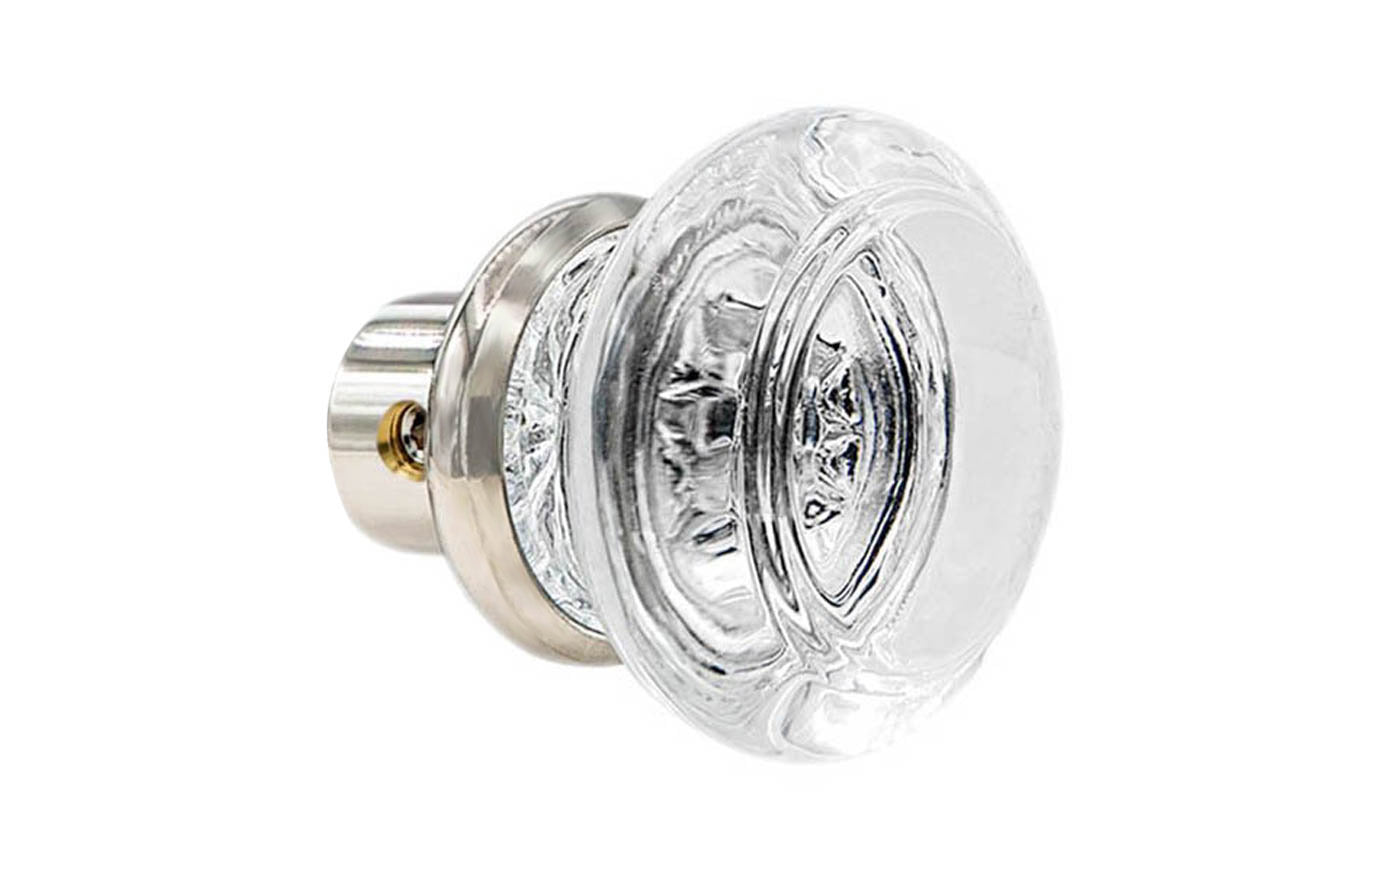 Single Classic Round Clear Glass Doorknob. A high quality & genuine glass doorknob with an attractive round design. The sparkling center point under glass amplifies reflected light to showcase beautiful facets. Solid brass base. Reproduction Glass Door Knobs. Traditional Round Glass Knobs. One knob. Polished Nickel Finish.